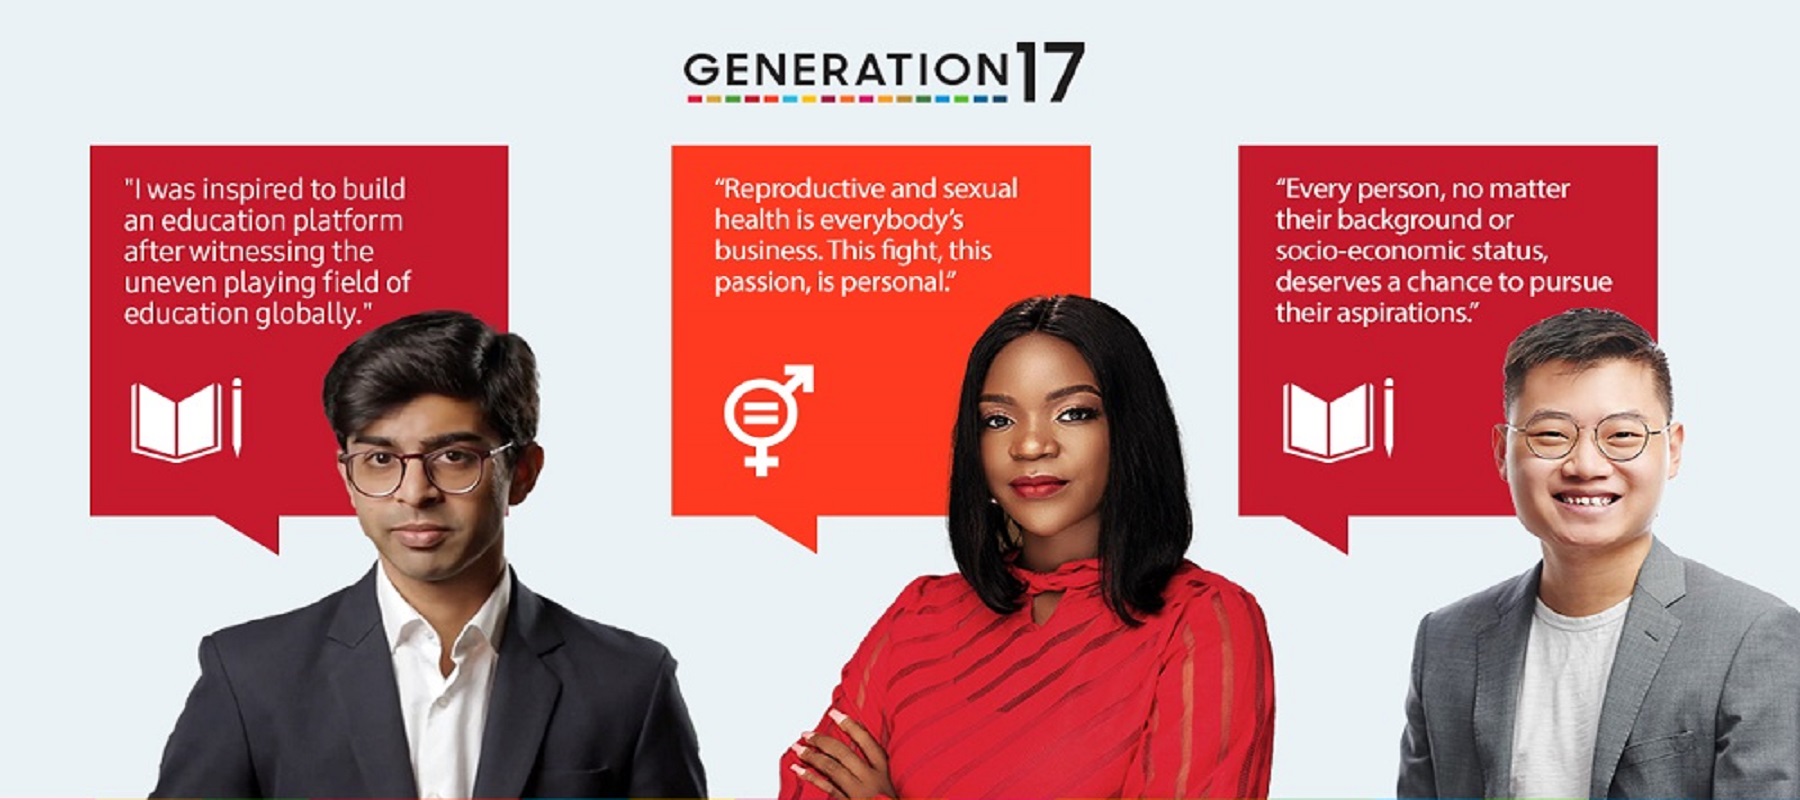 Samsung, UNDP appoint three youth leaders as ambassadors to the Generation 17 campaign